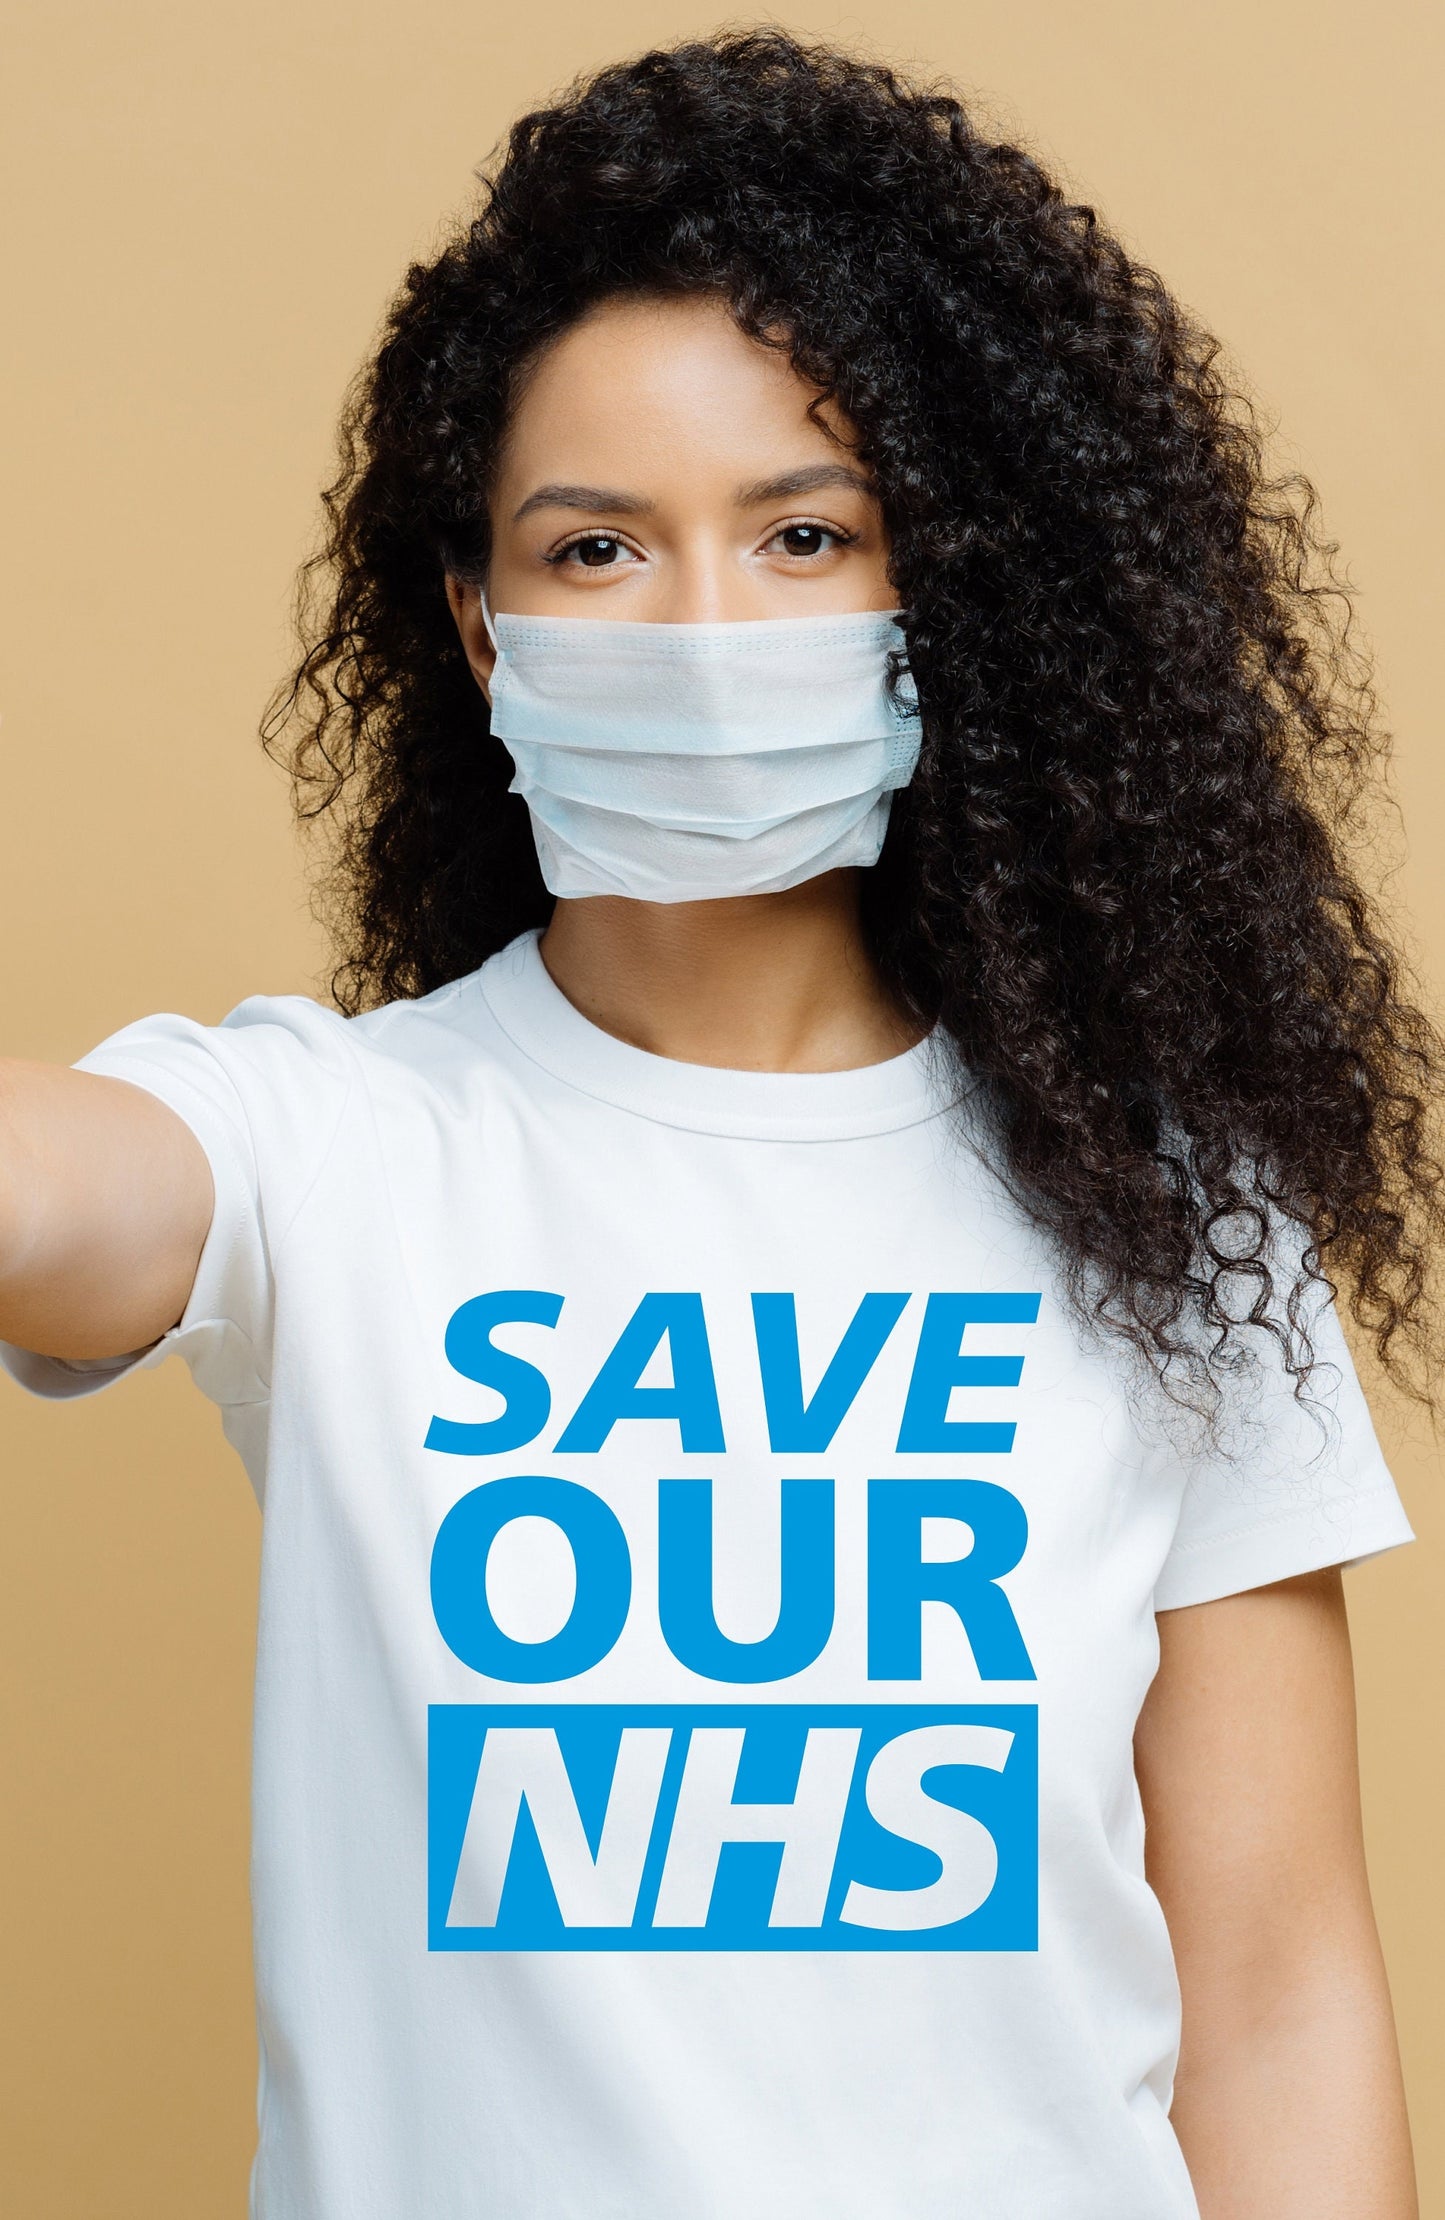 Save Our NHS T-Shirt | Save Our NHS Tee | Nurses Strike T-shirt | Doctor Tee | F*ck the Tories T-Shirt